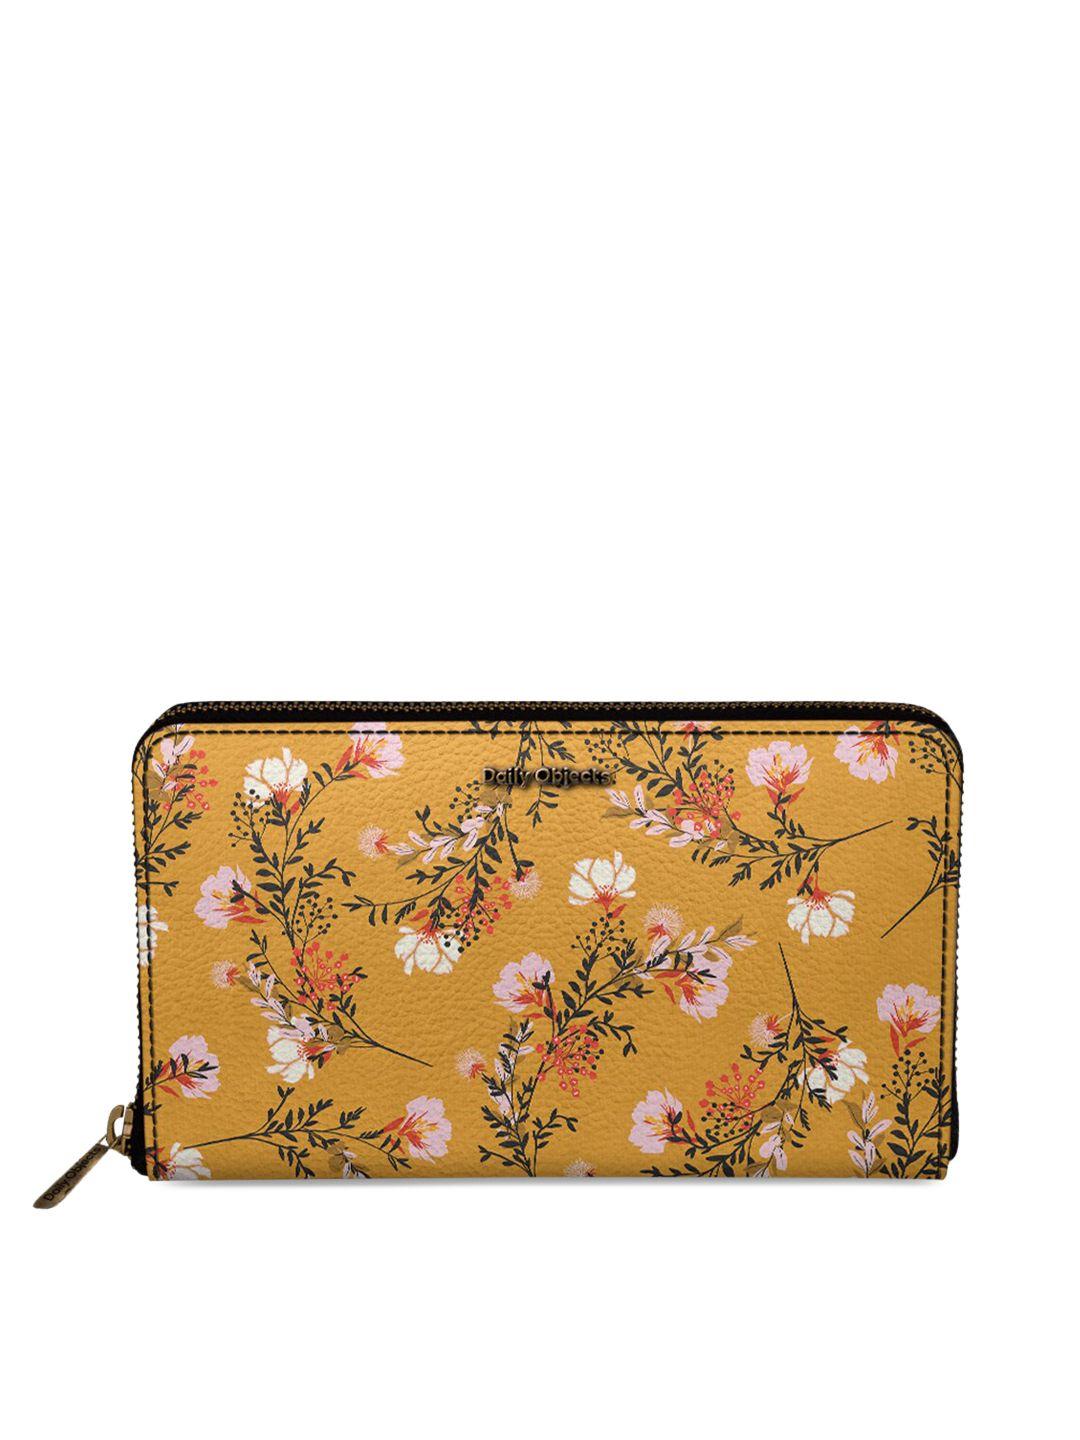 dailyobjects women multicoloured floral print zip around wallet